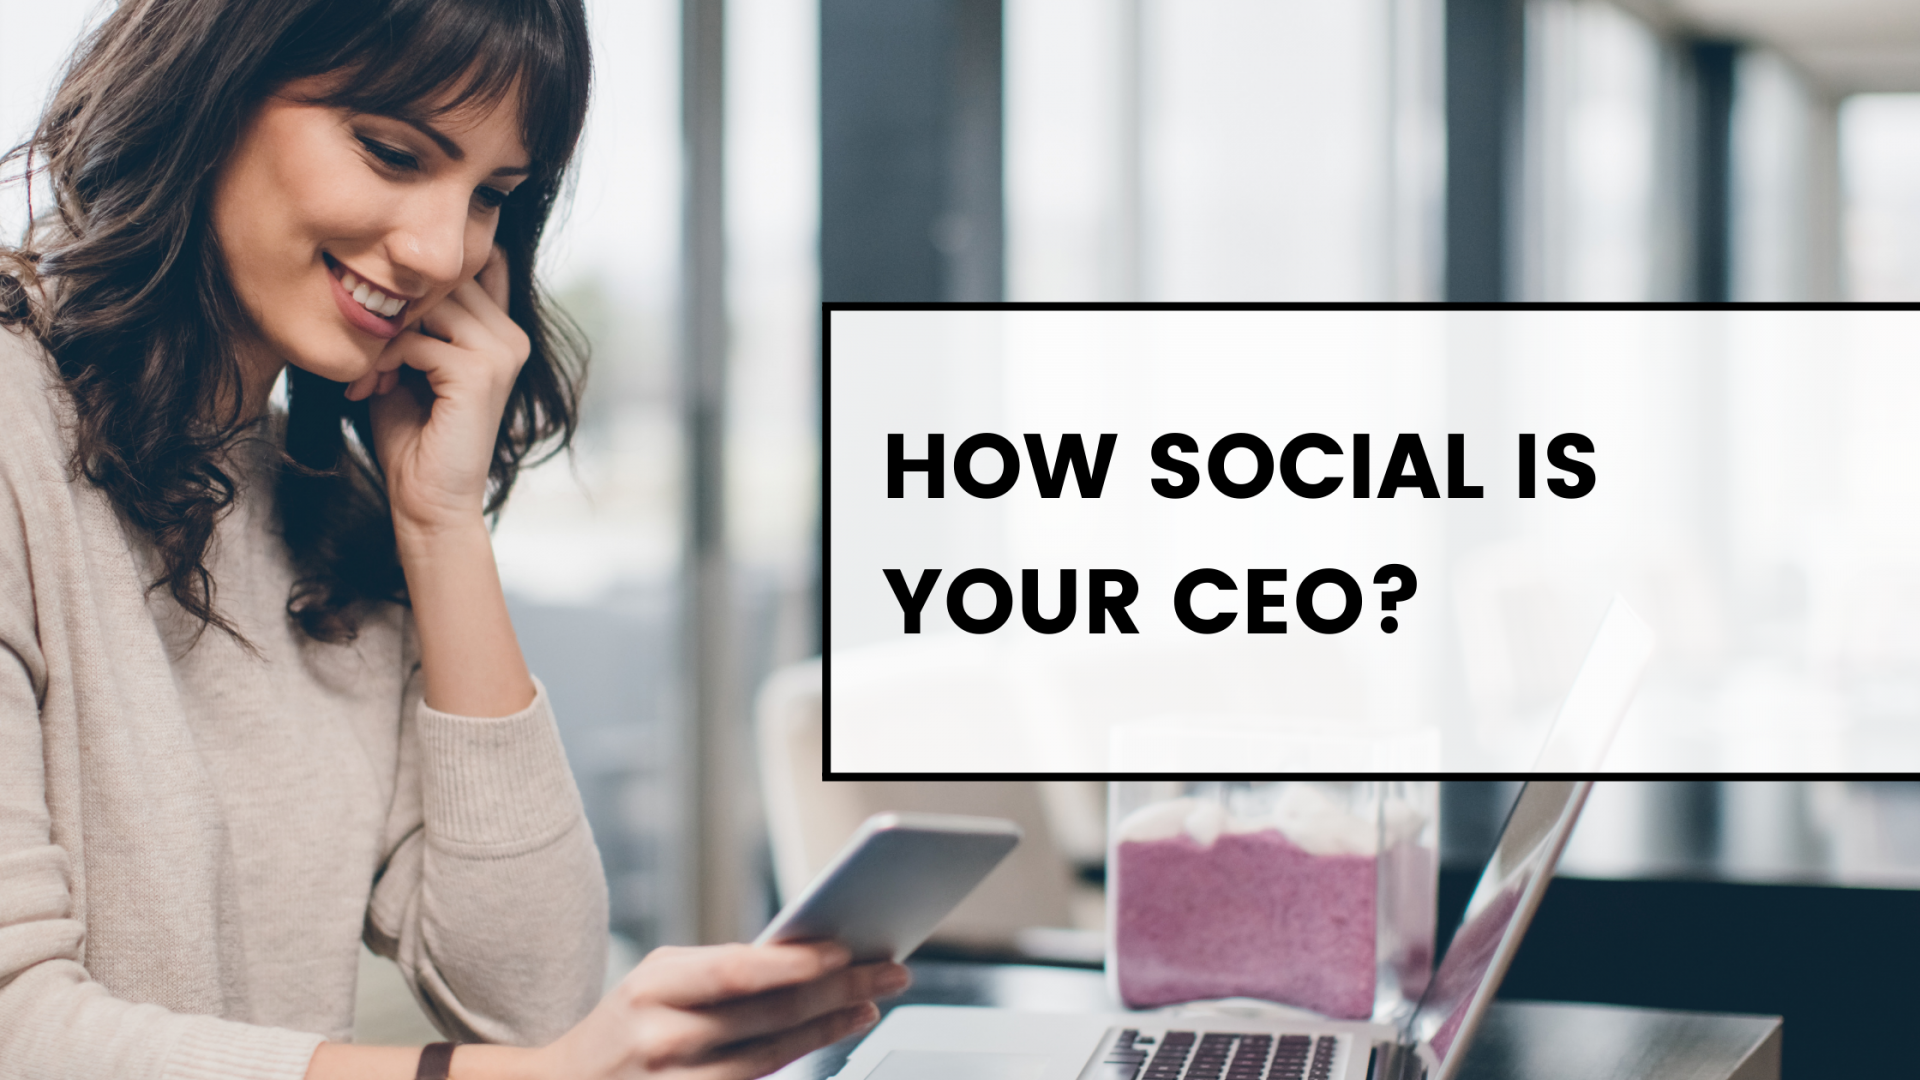 How Social is your CEO?